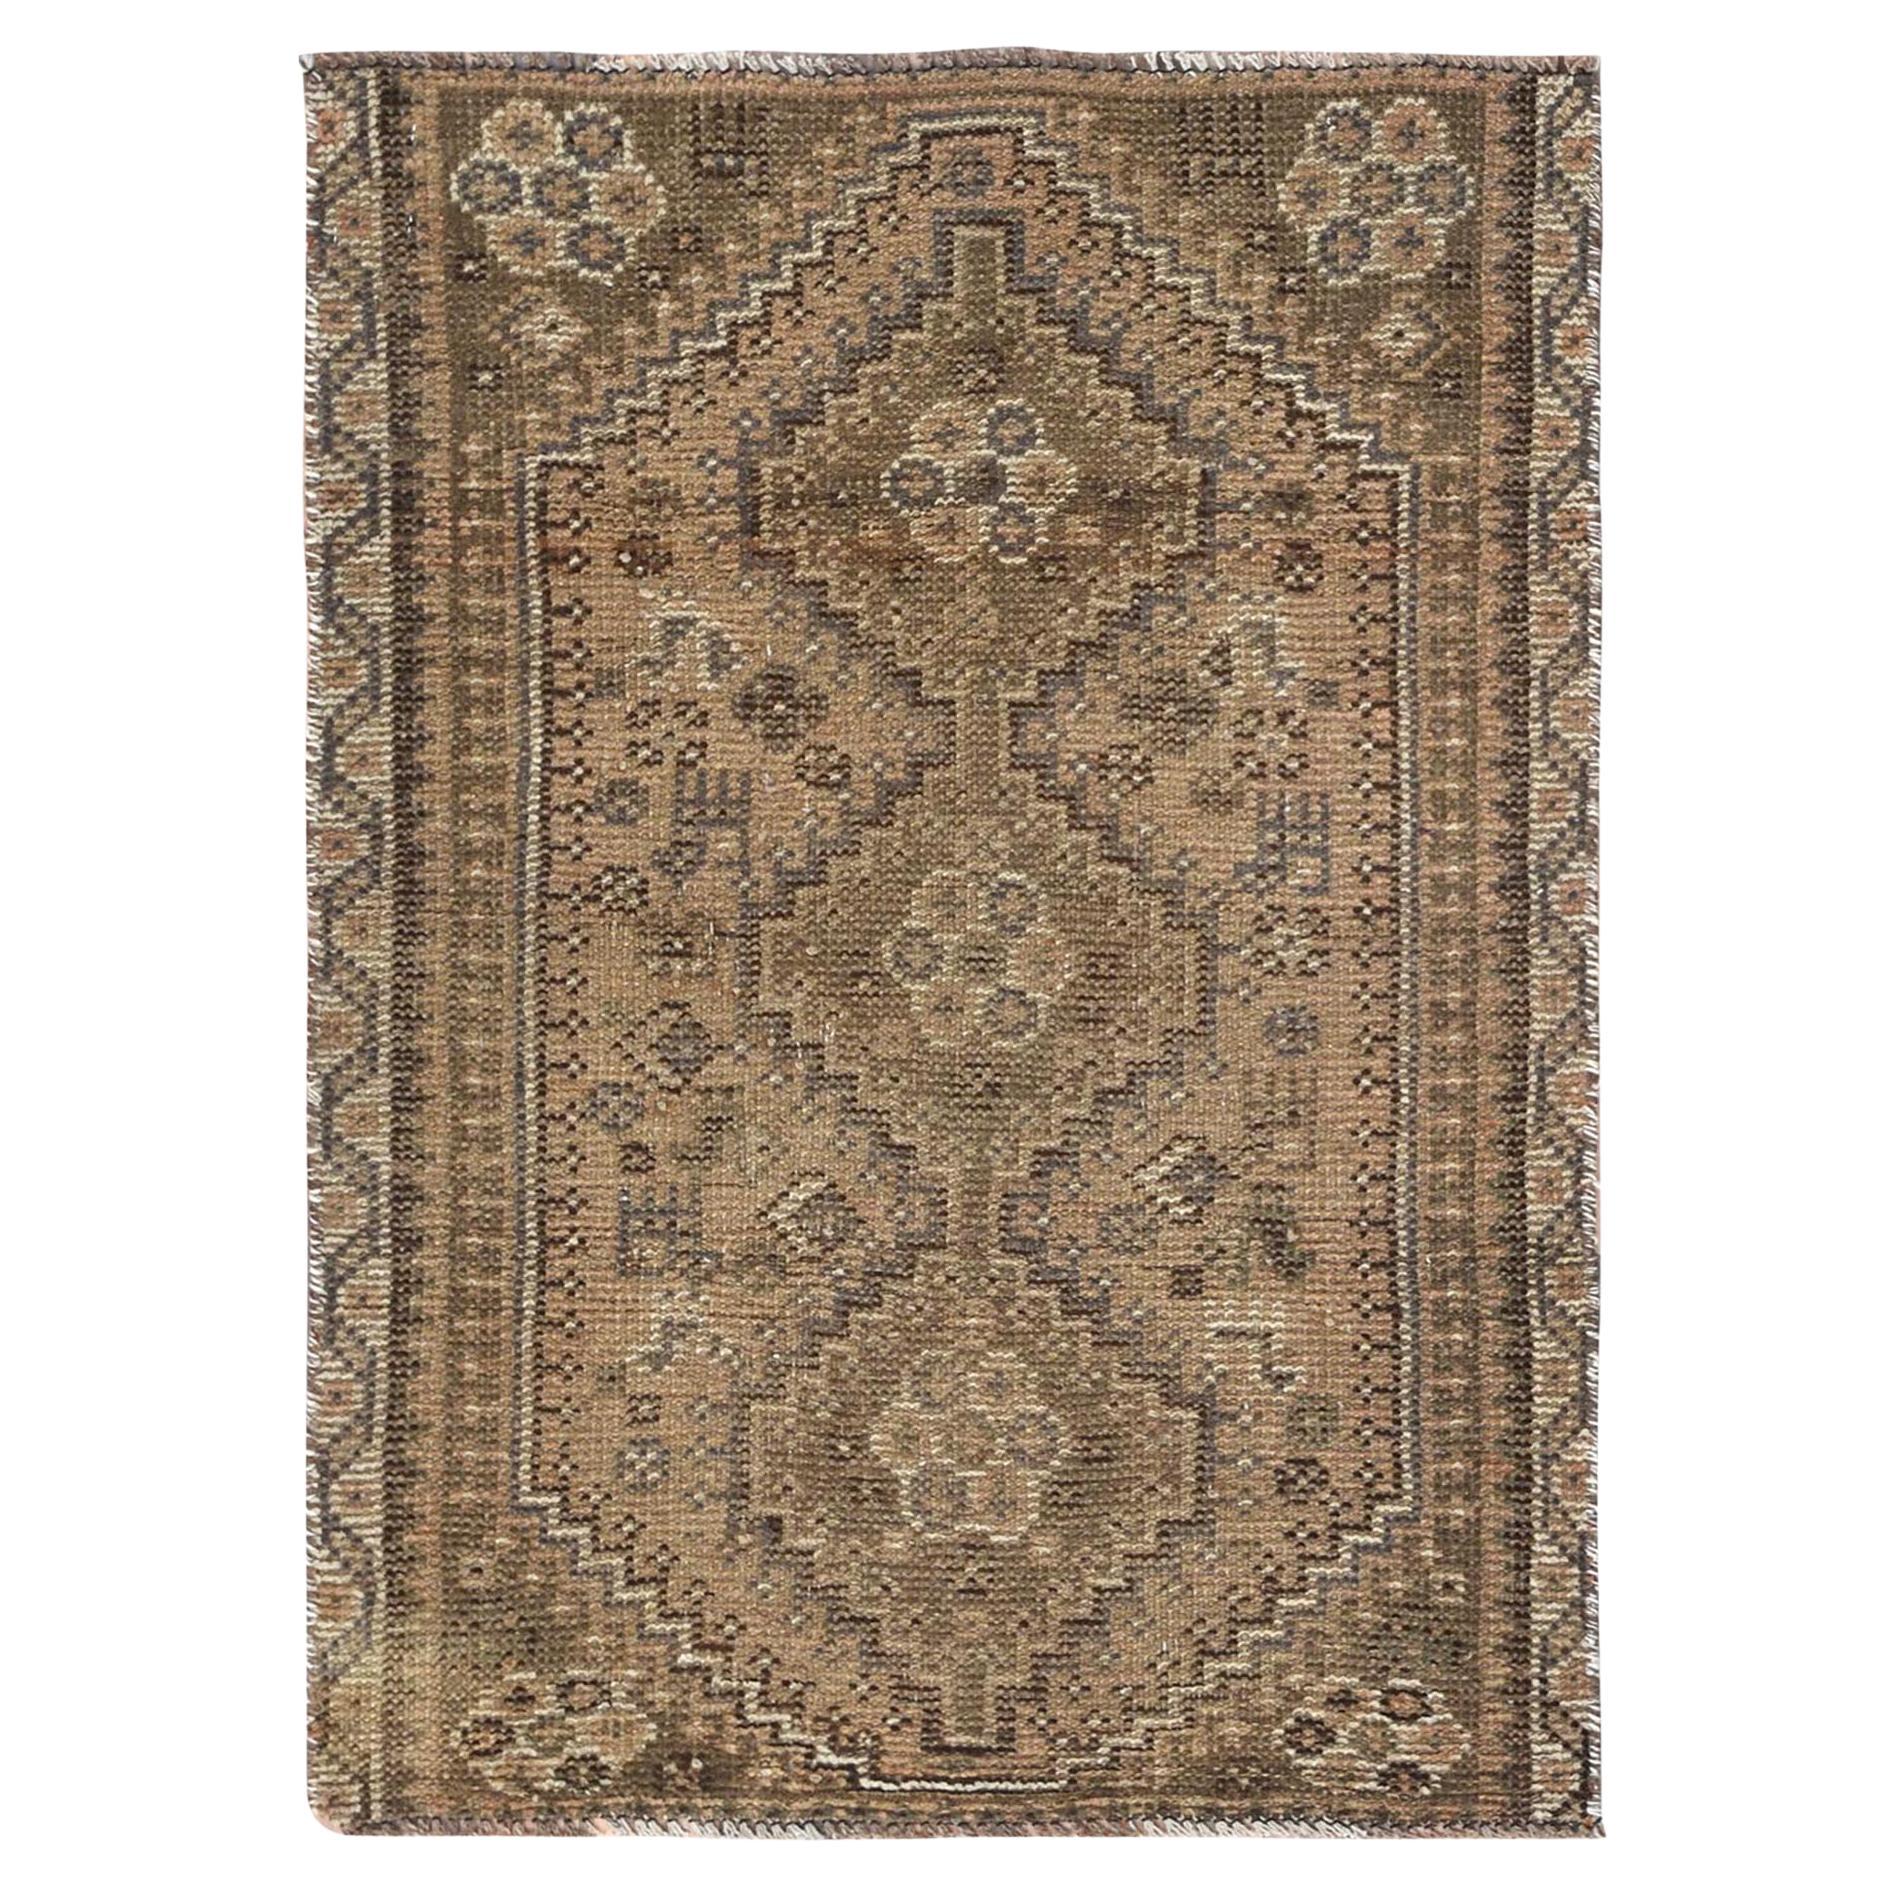 Tortilla Brown Pure Wool Hand Knotted Semi Antique Persian Shiraz Worn Down Rug